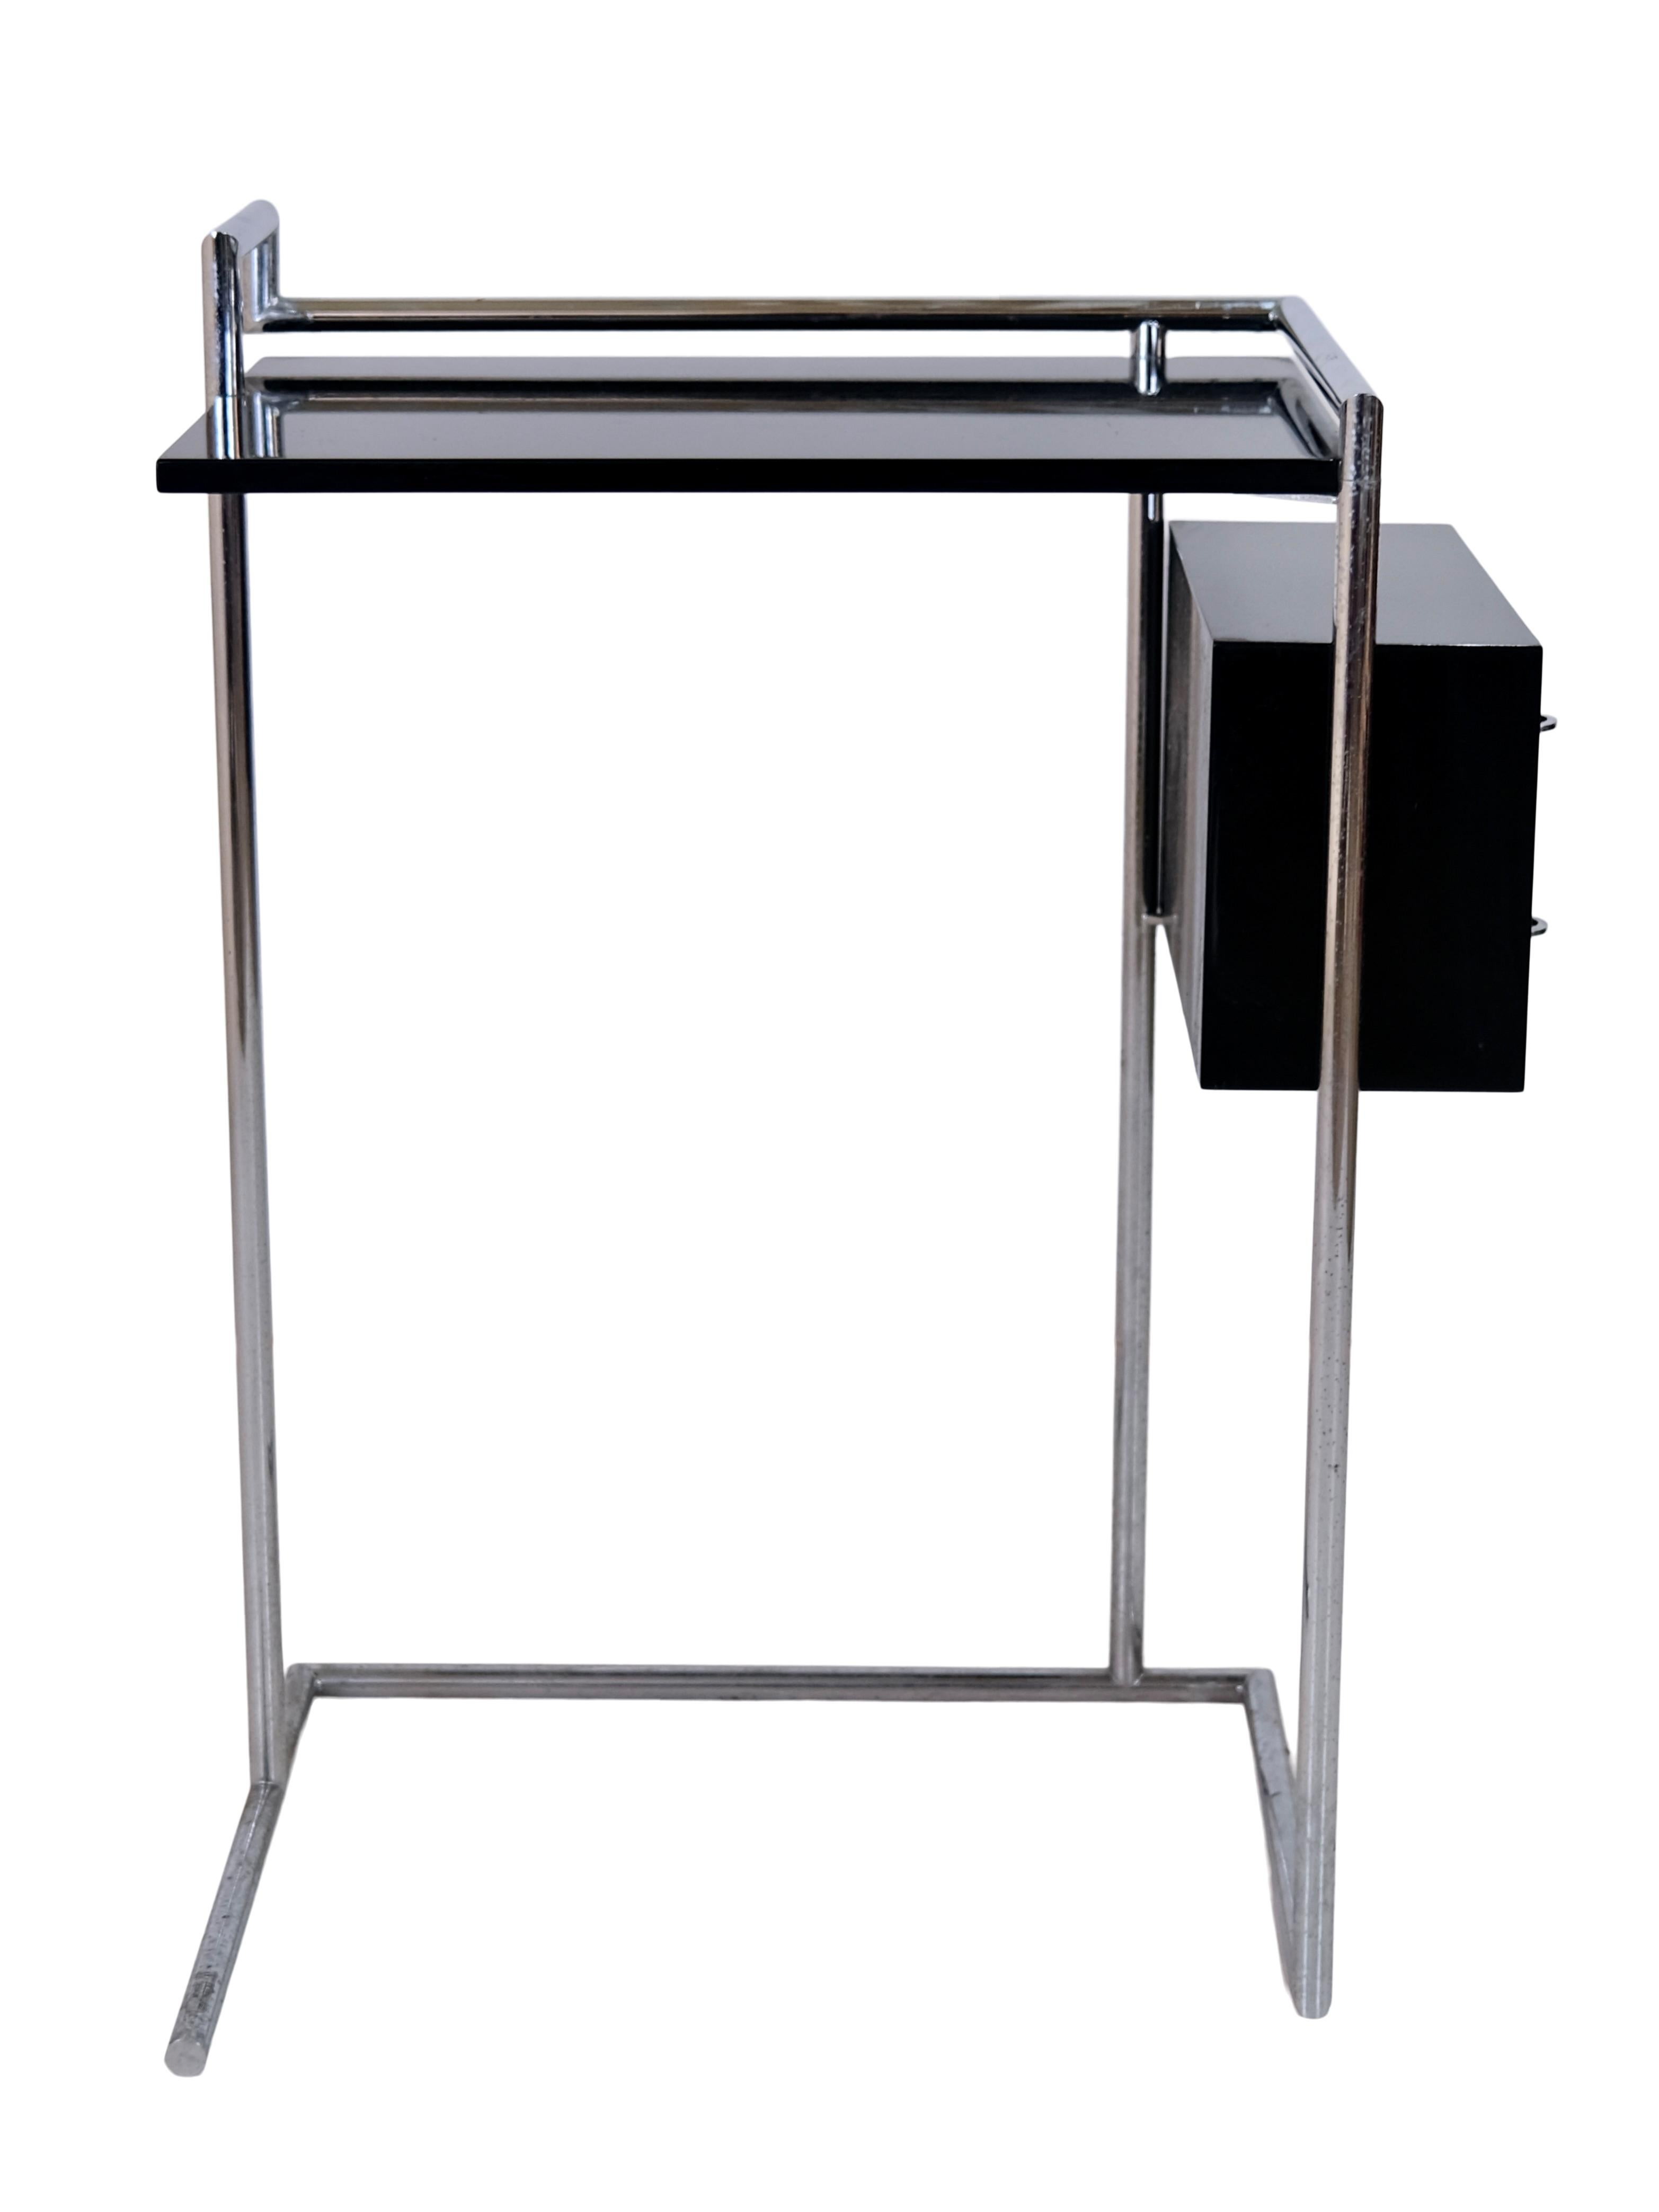 Art Deco Black and Chromed Steel Tube Coiffeuse Table by Eileen Gray for ClassiCon